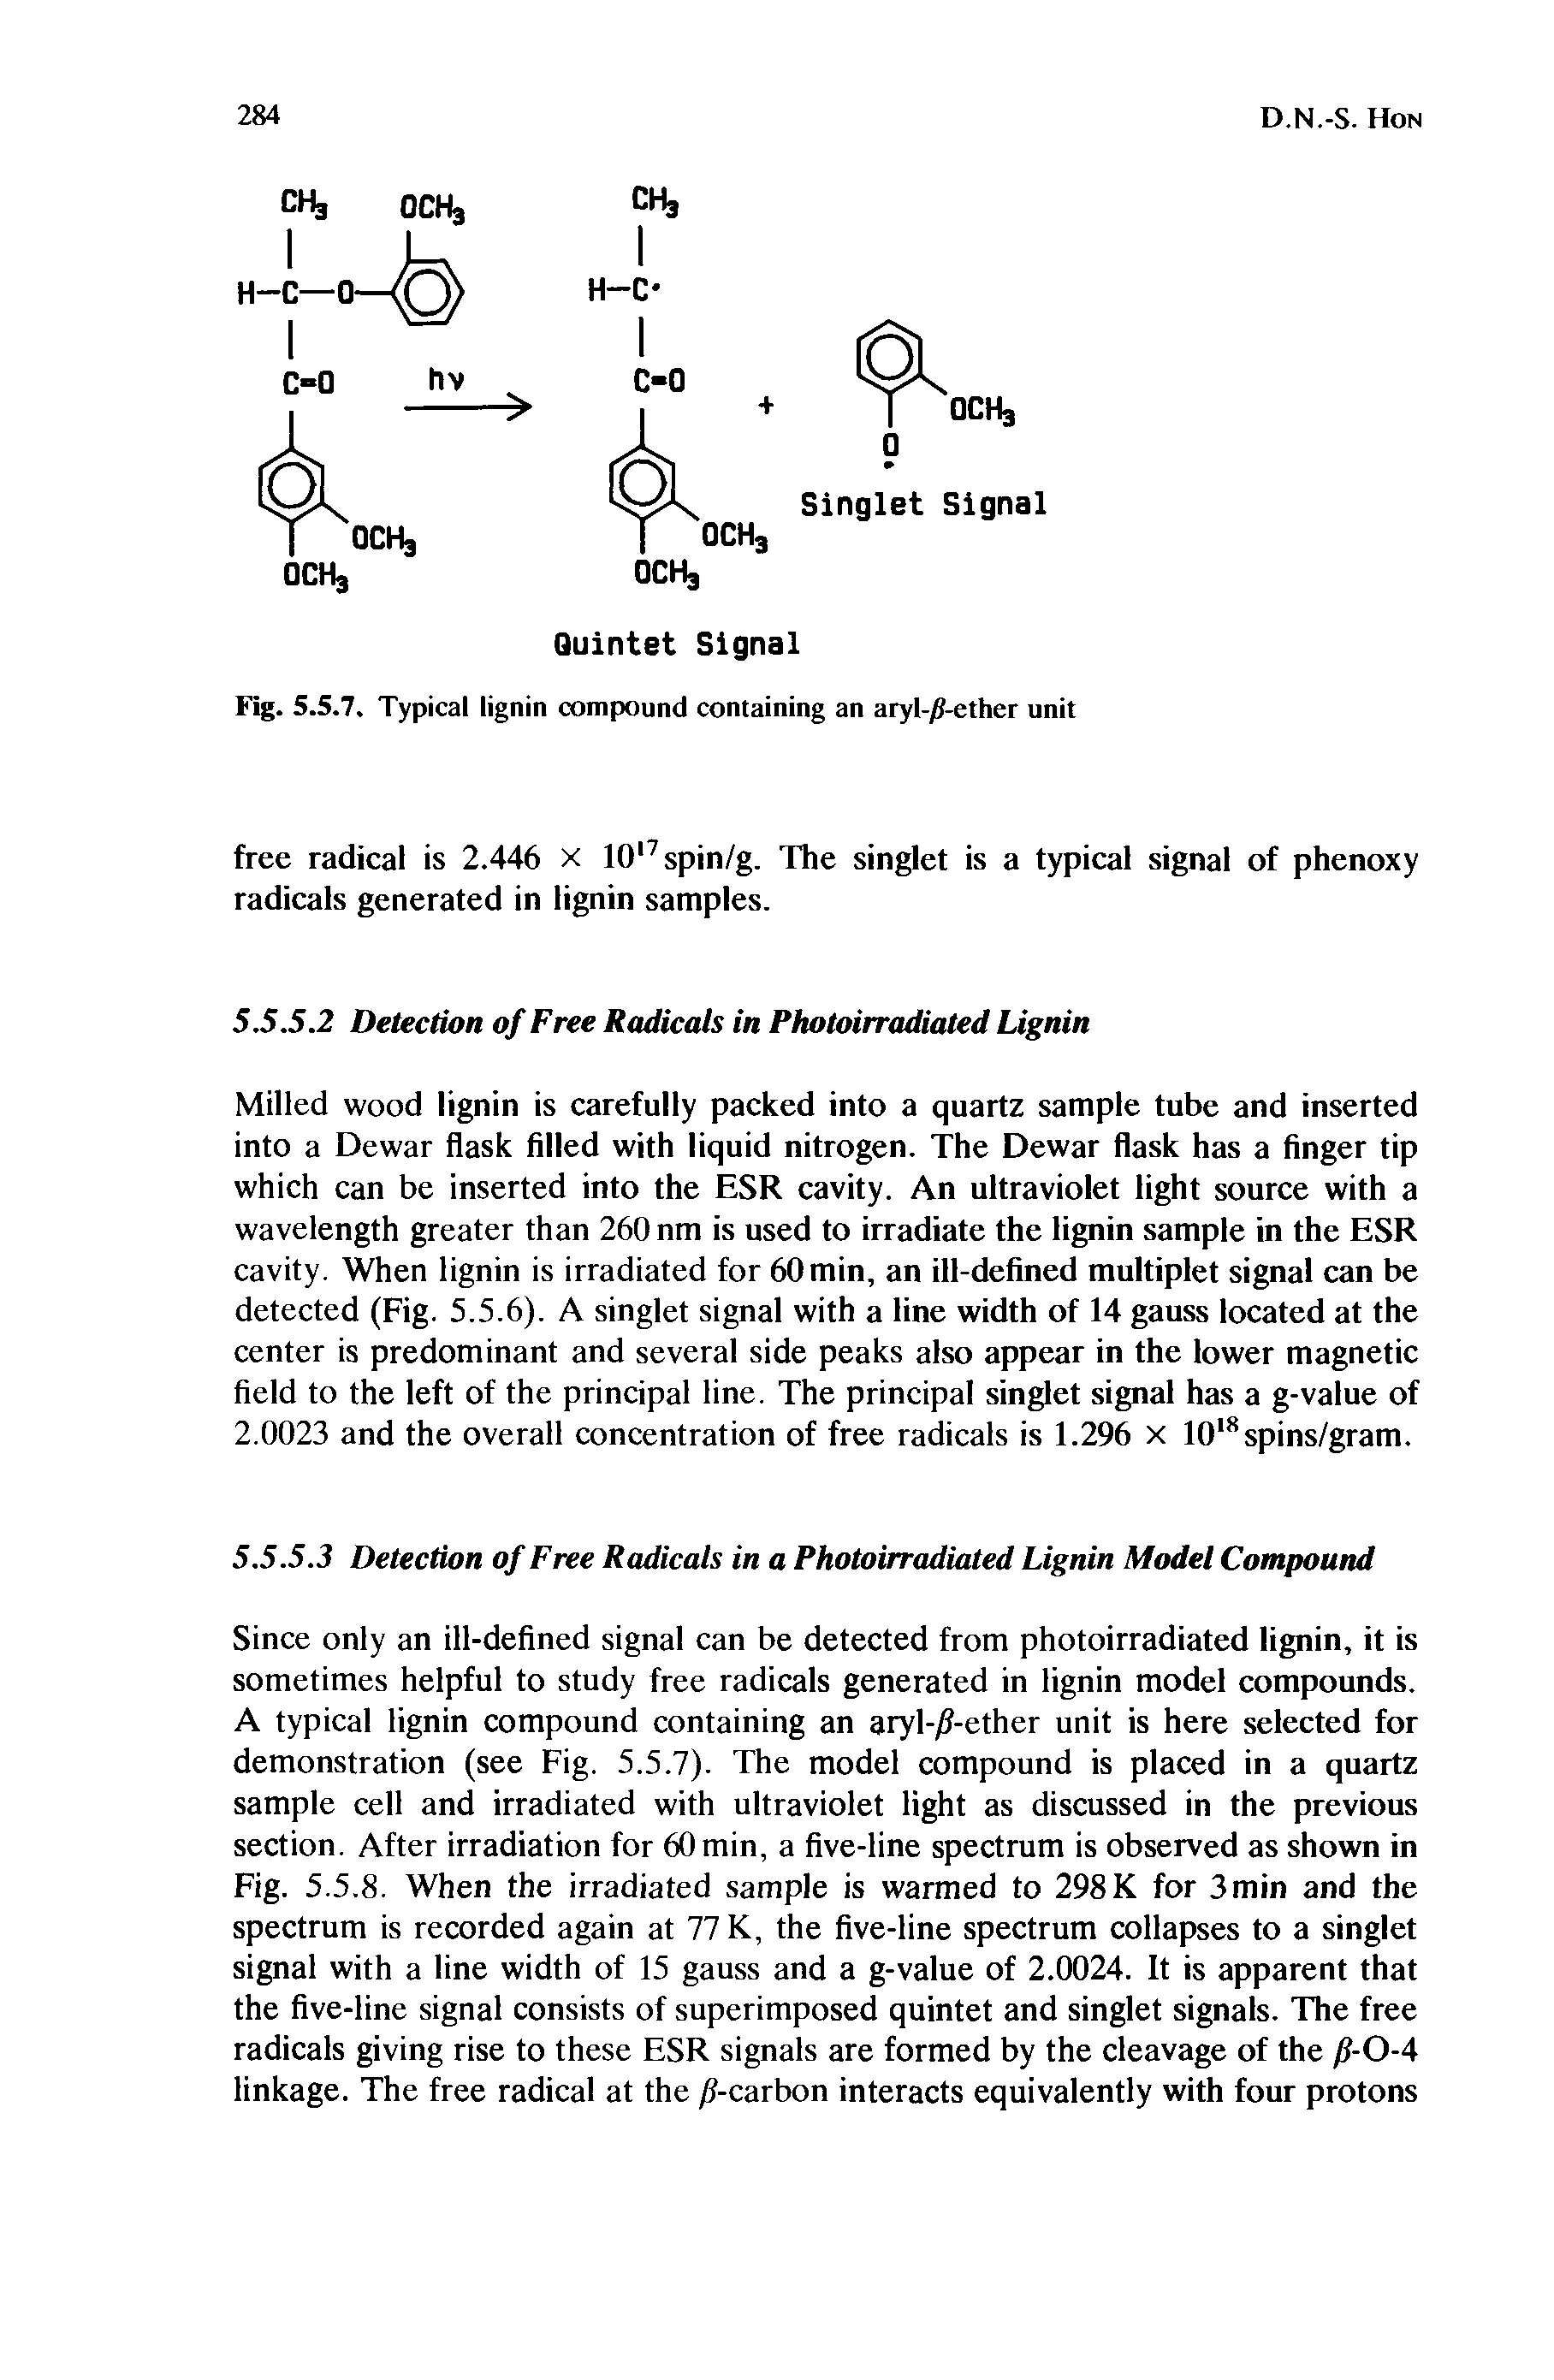 Fig. 5.5.7. Typical lignin compound containing an aryl-/f-ether unit...